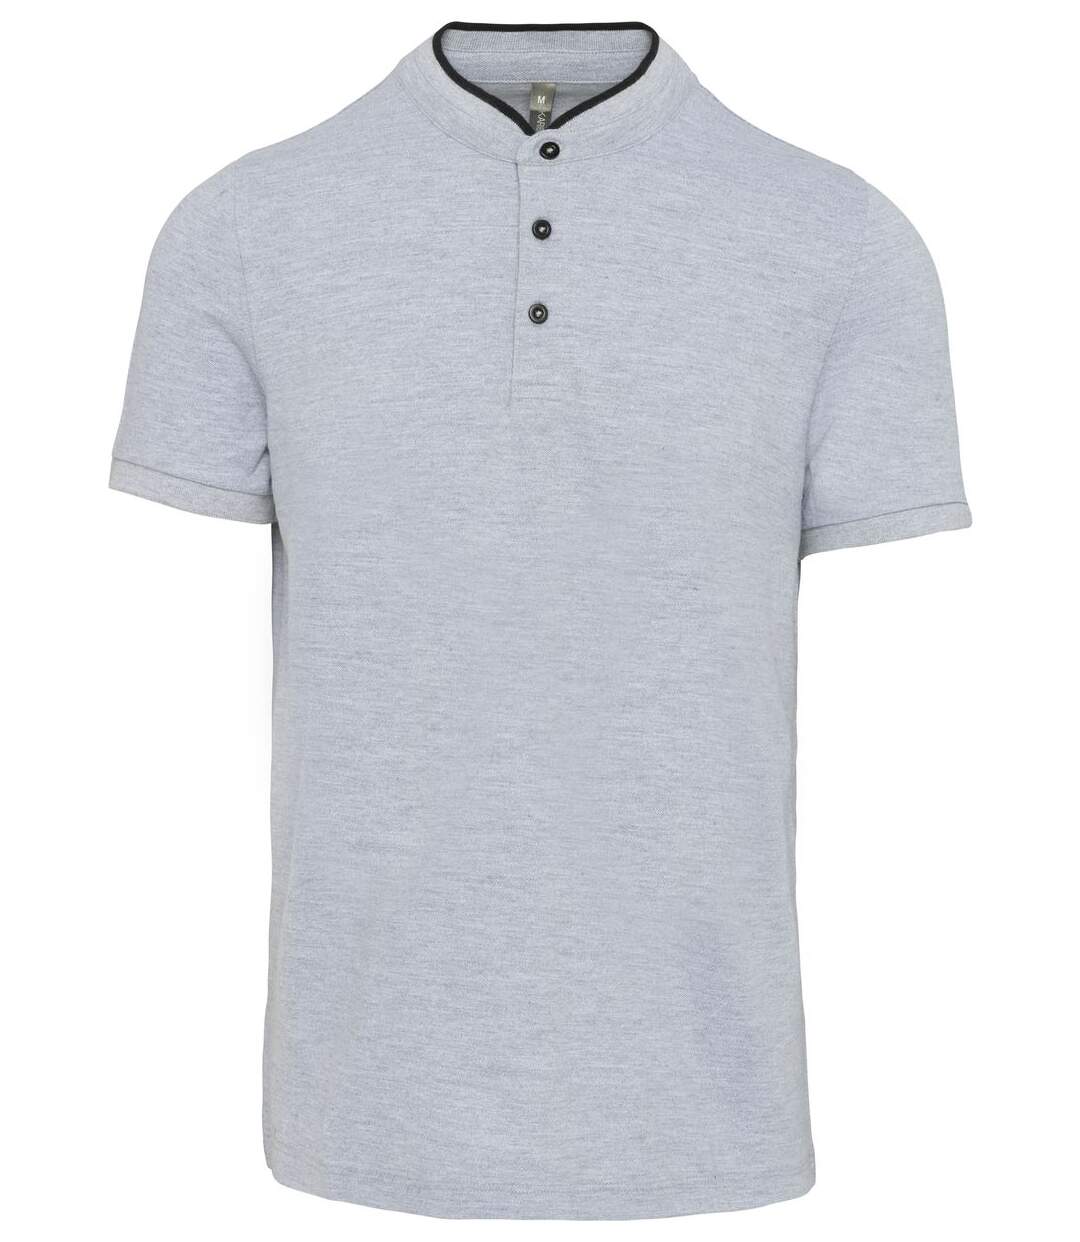 Polo homme col mao - manches courtes - K223 - gris chiné